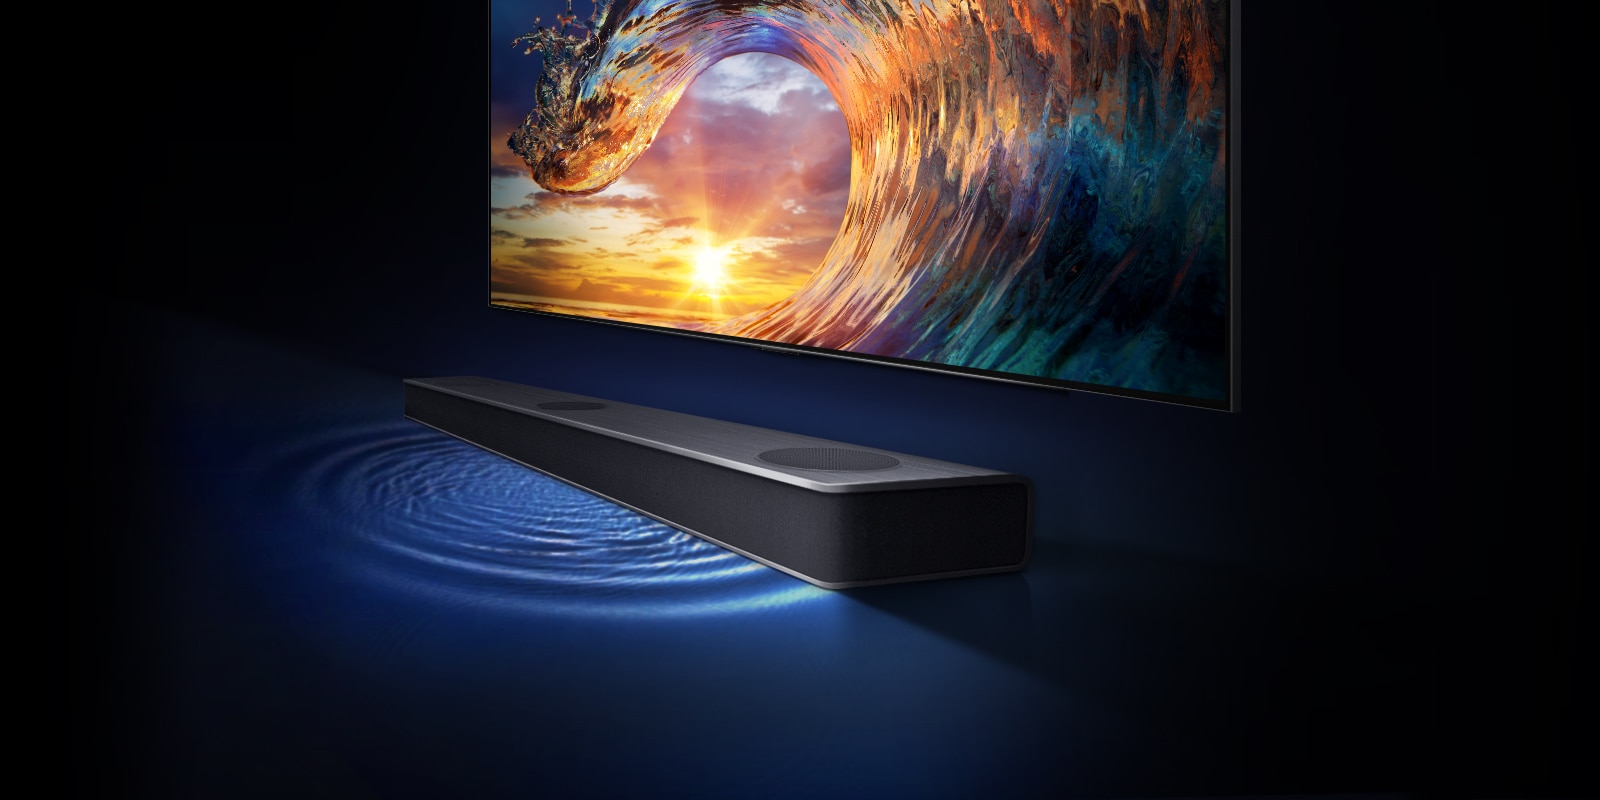 TV shows the sunset sky and rainbow-colored waves. There is a sound bar under the TV and the sound wavelength is on the floor.